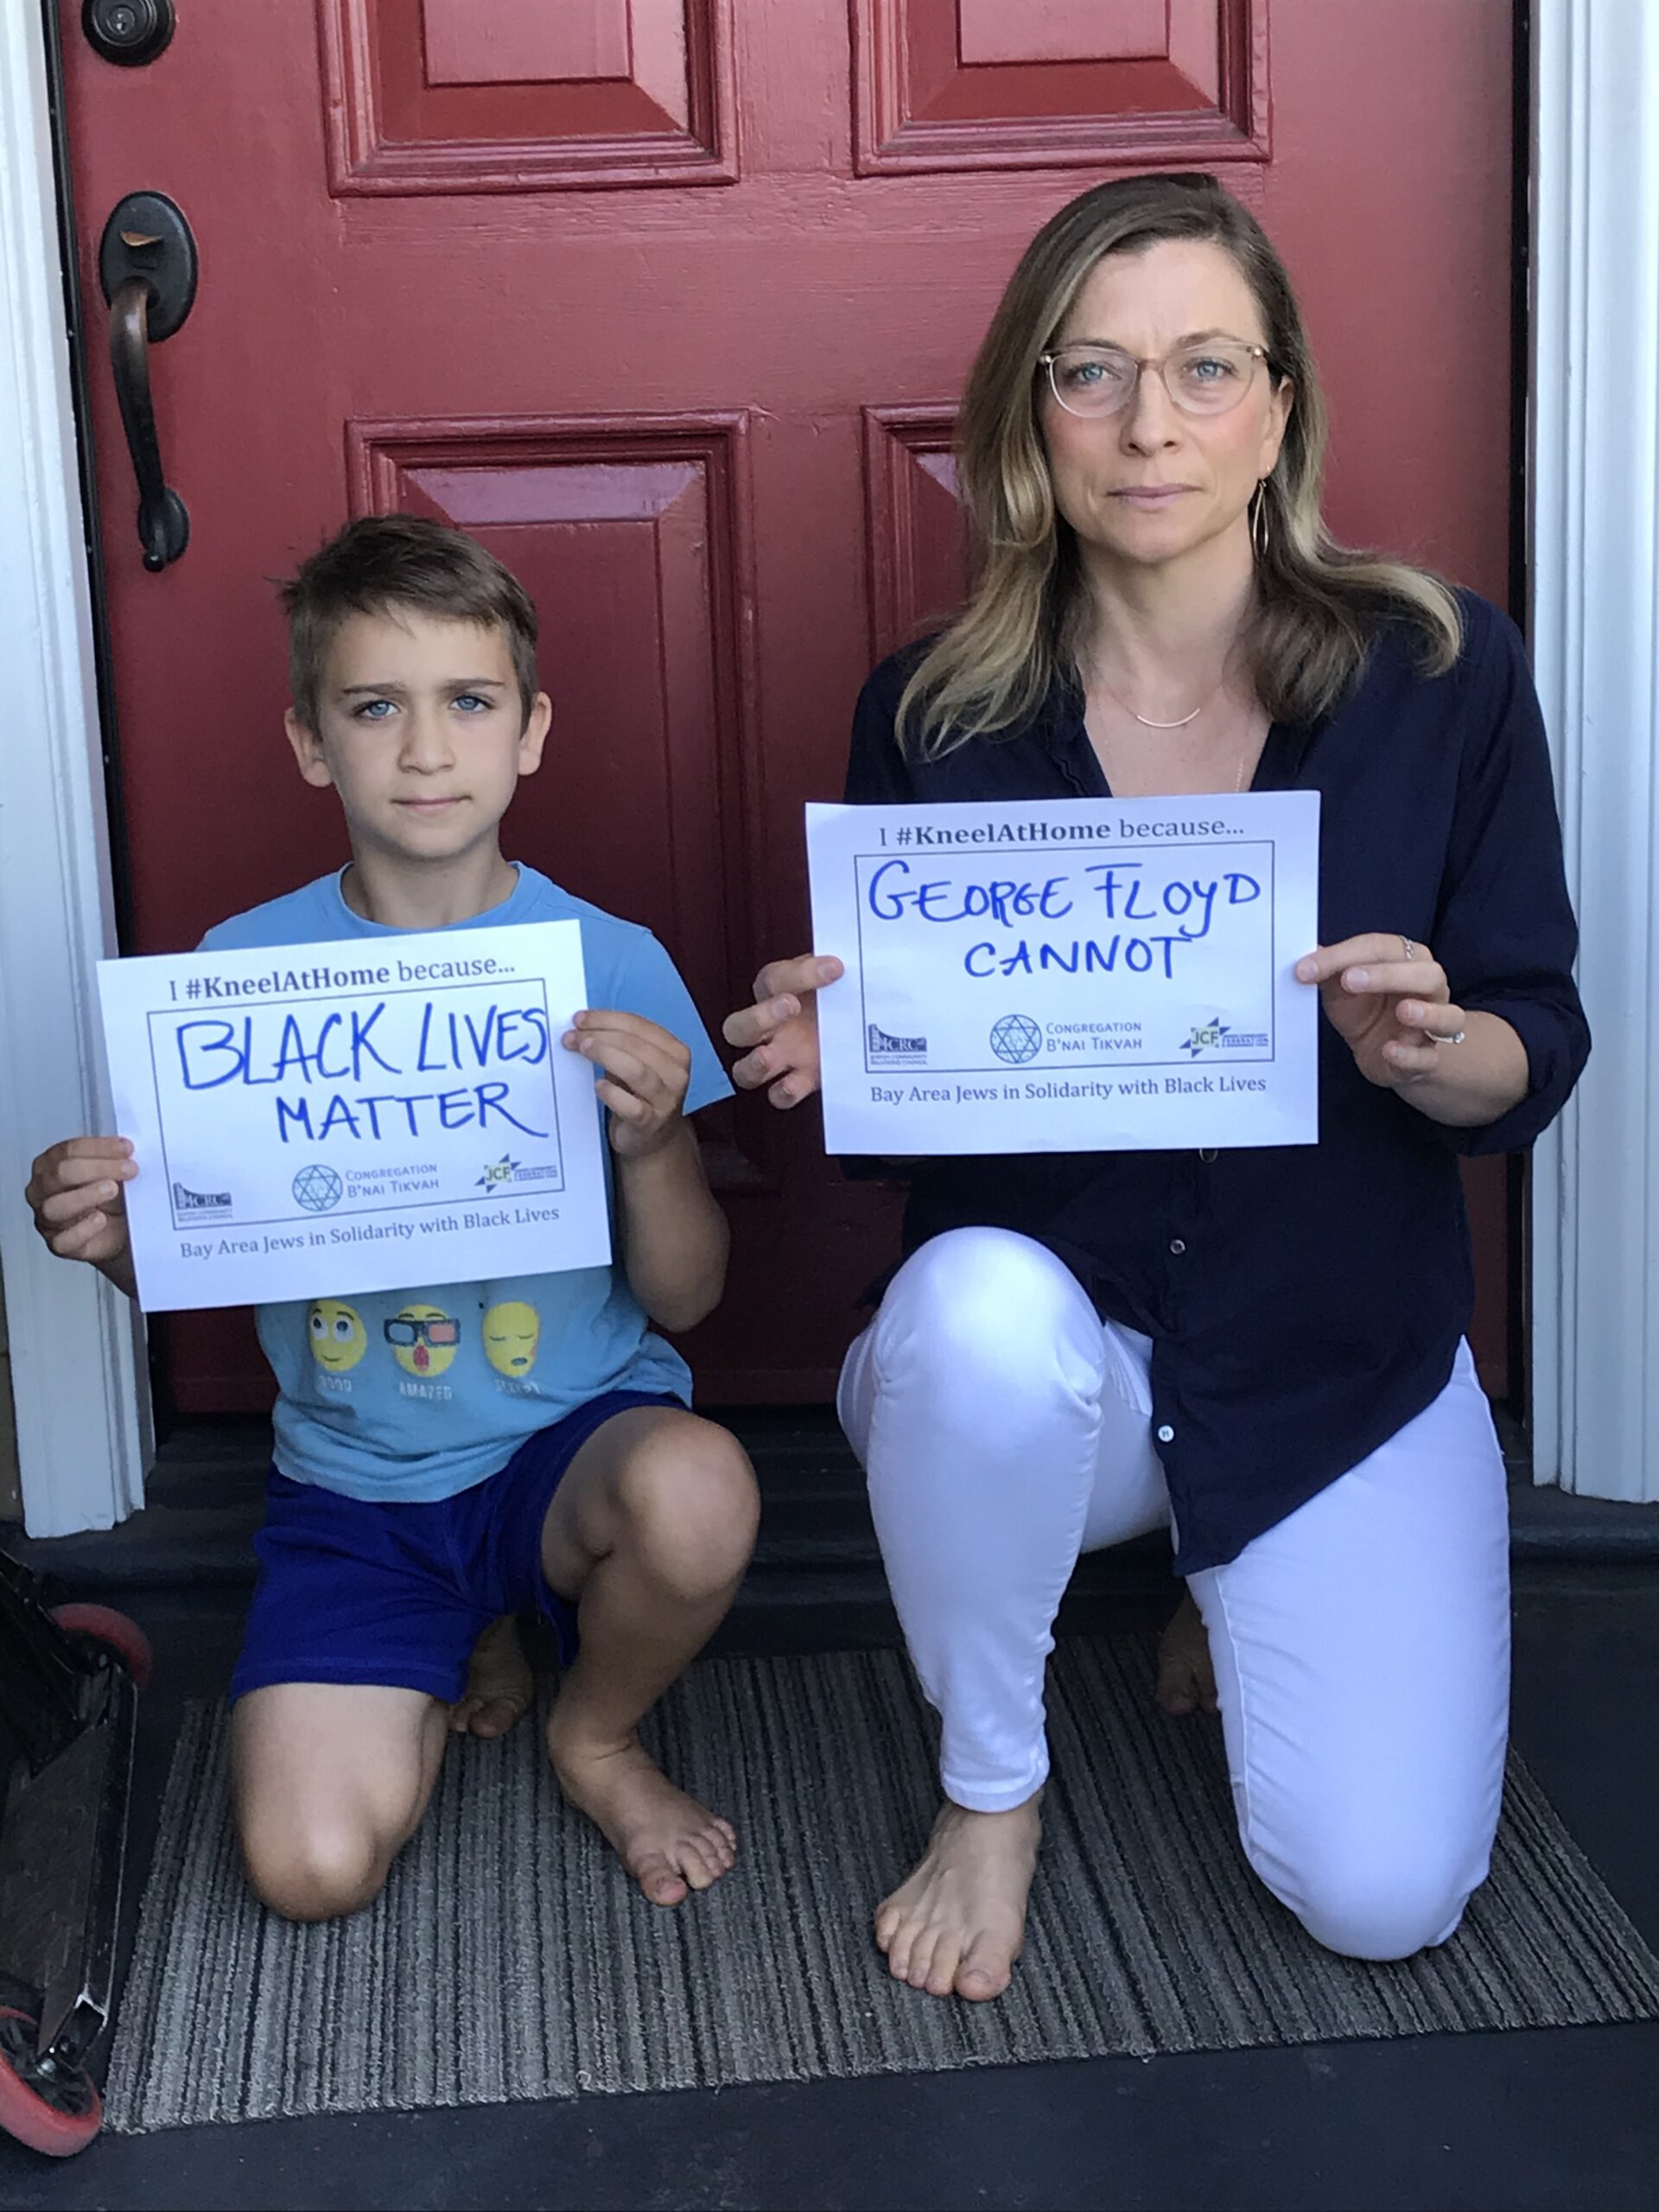 Rabbi and son kneeling for justice